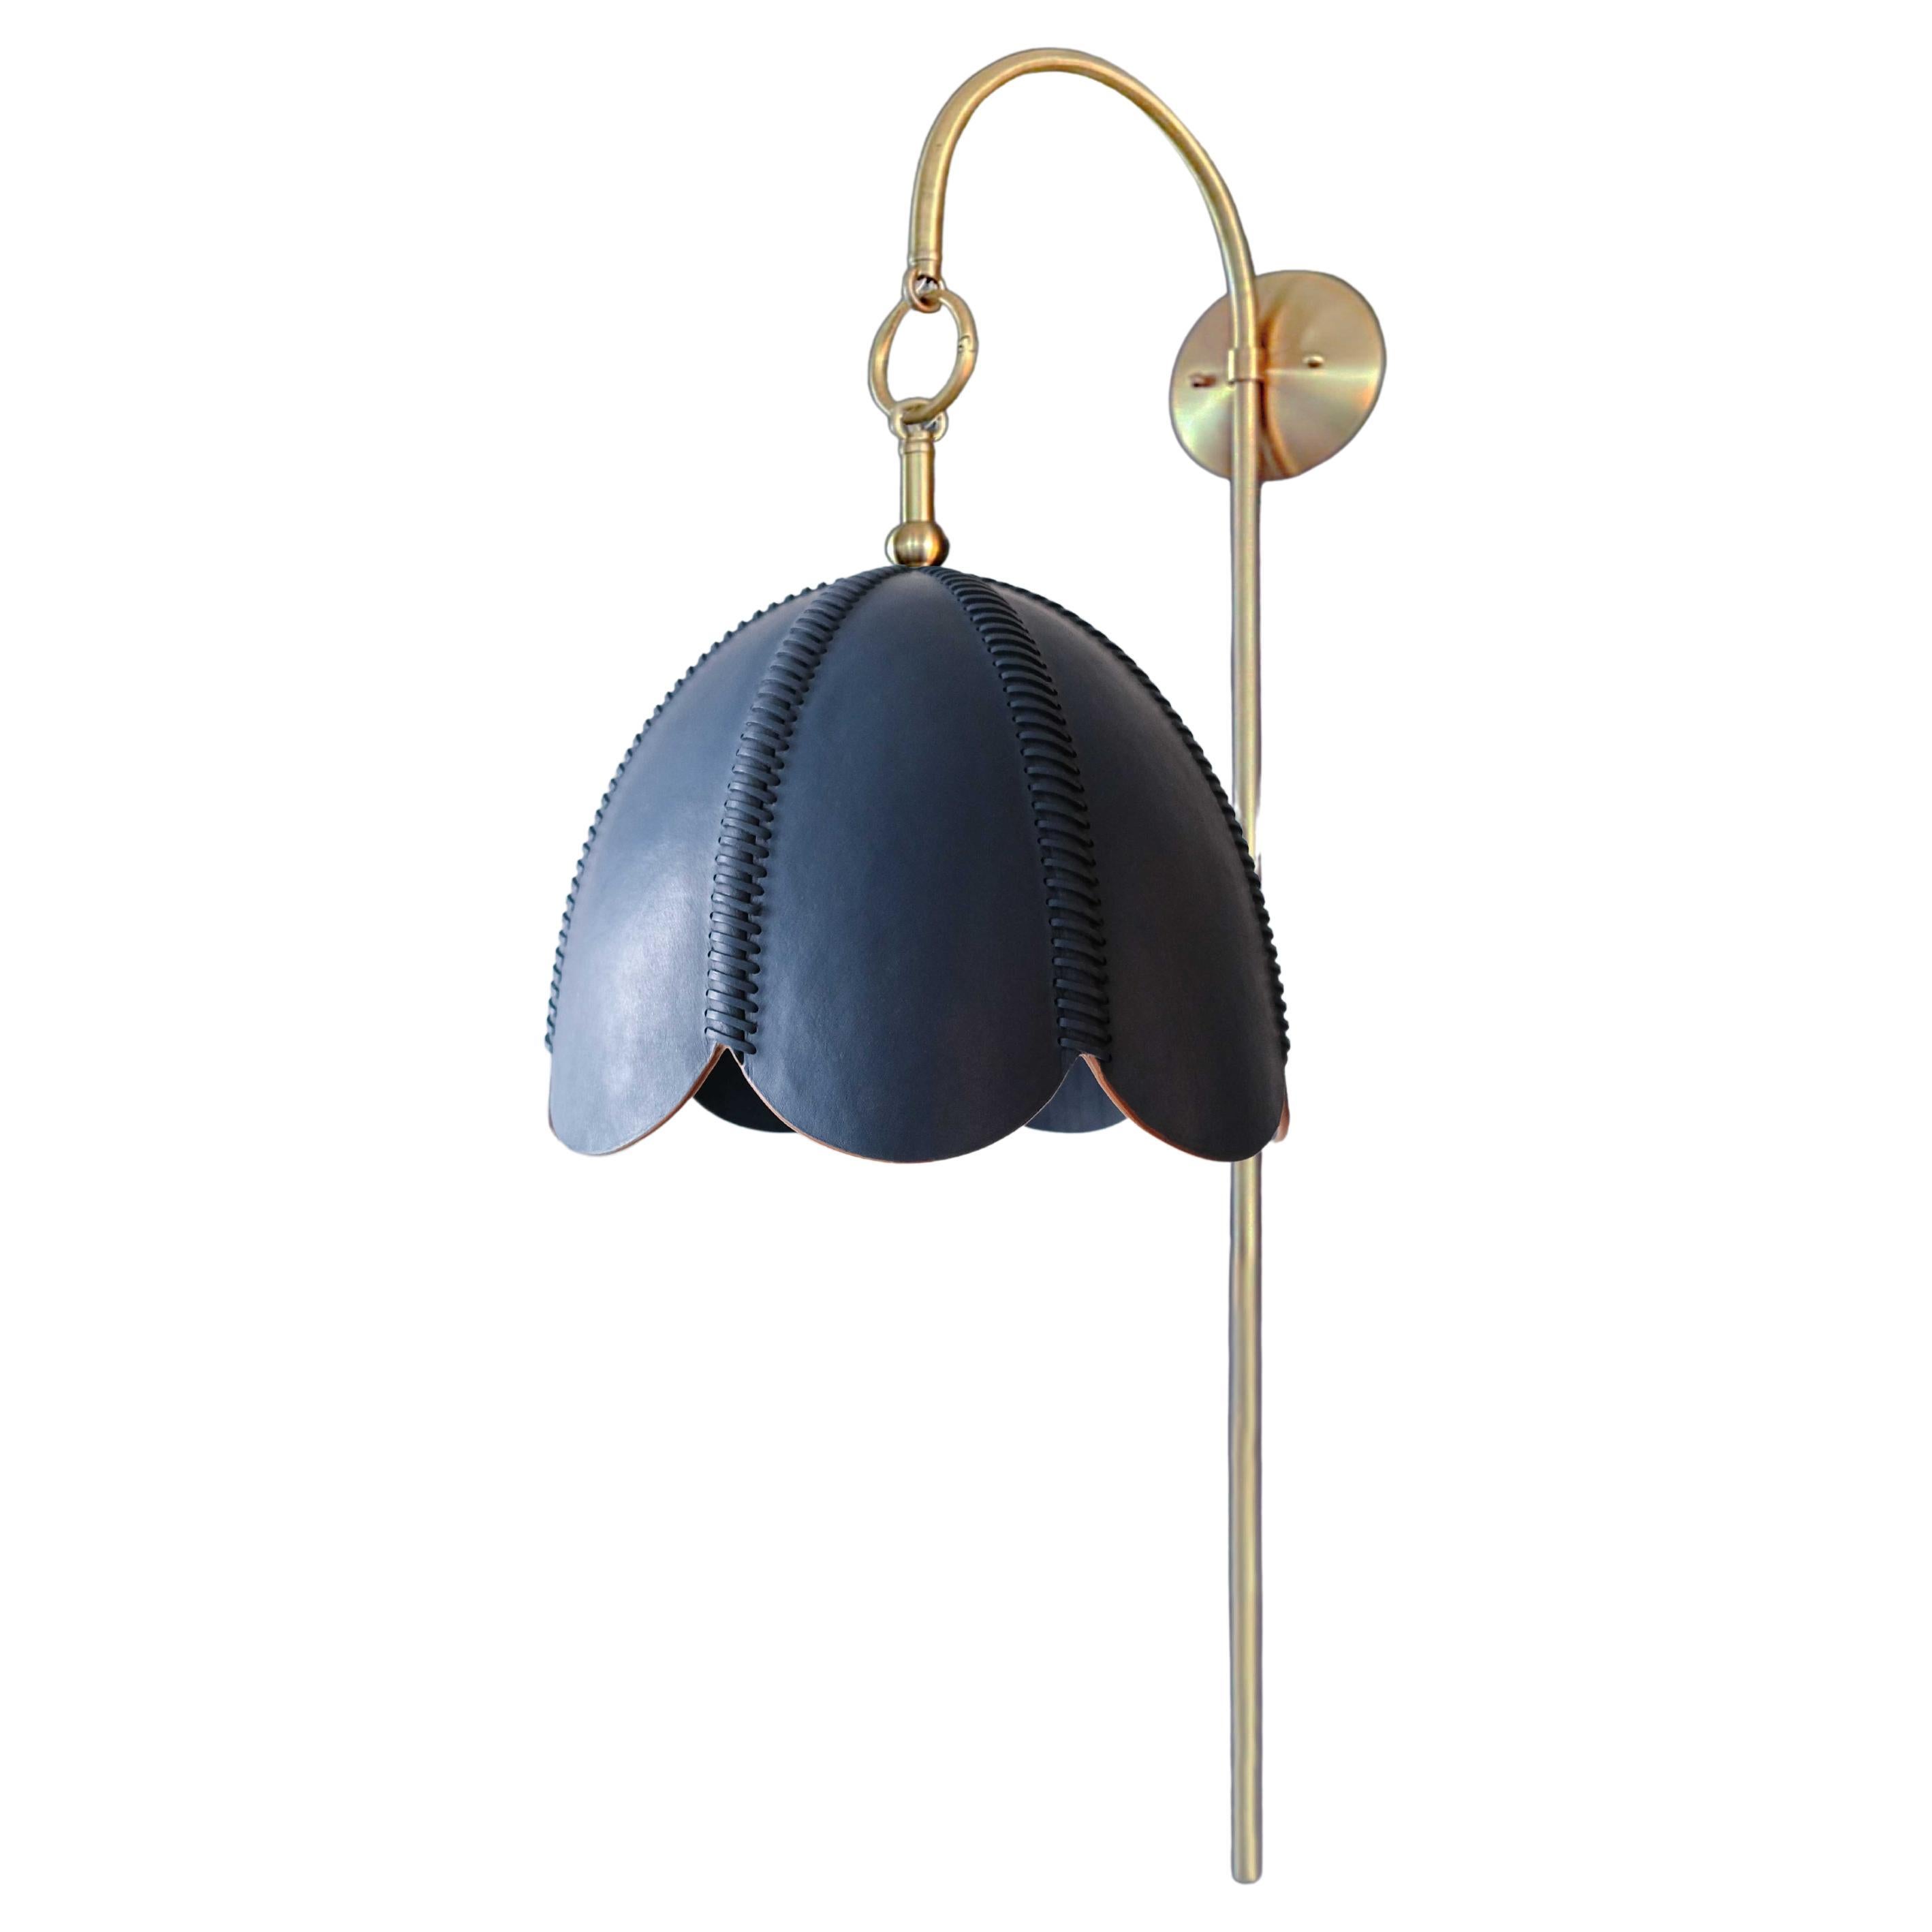 Leather Arched Sconce, Cobalt, Small, Doma, Saddle Lamp Collection For Sale